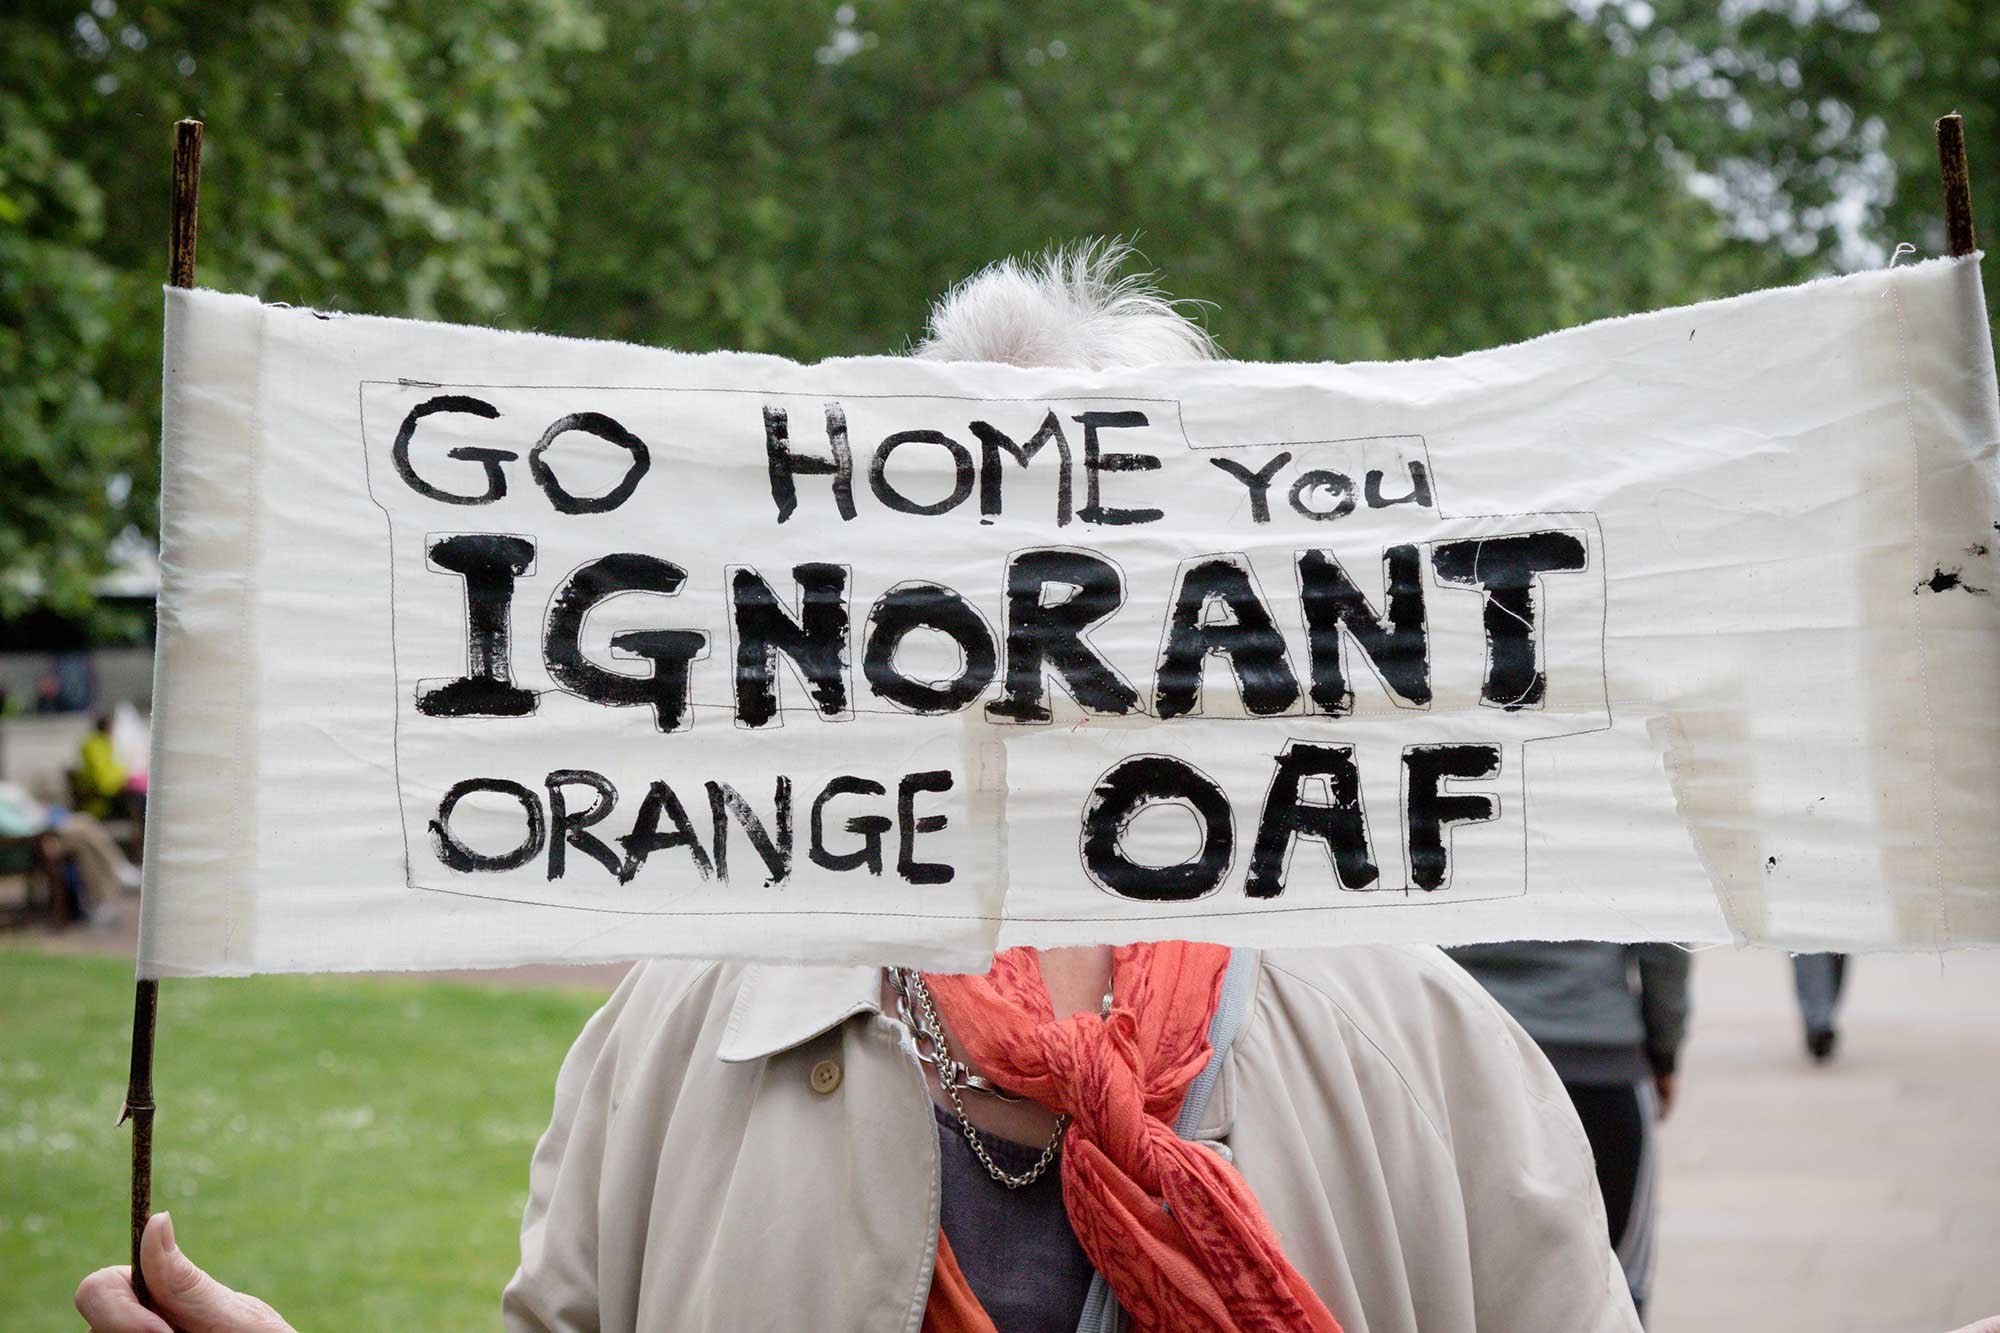 a sign that says “Go home you ignorant orange oaf"